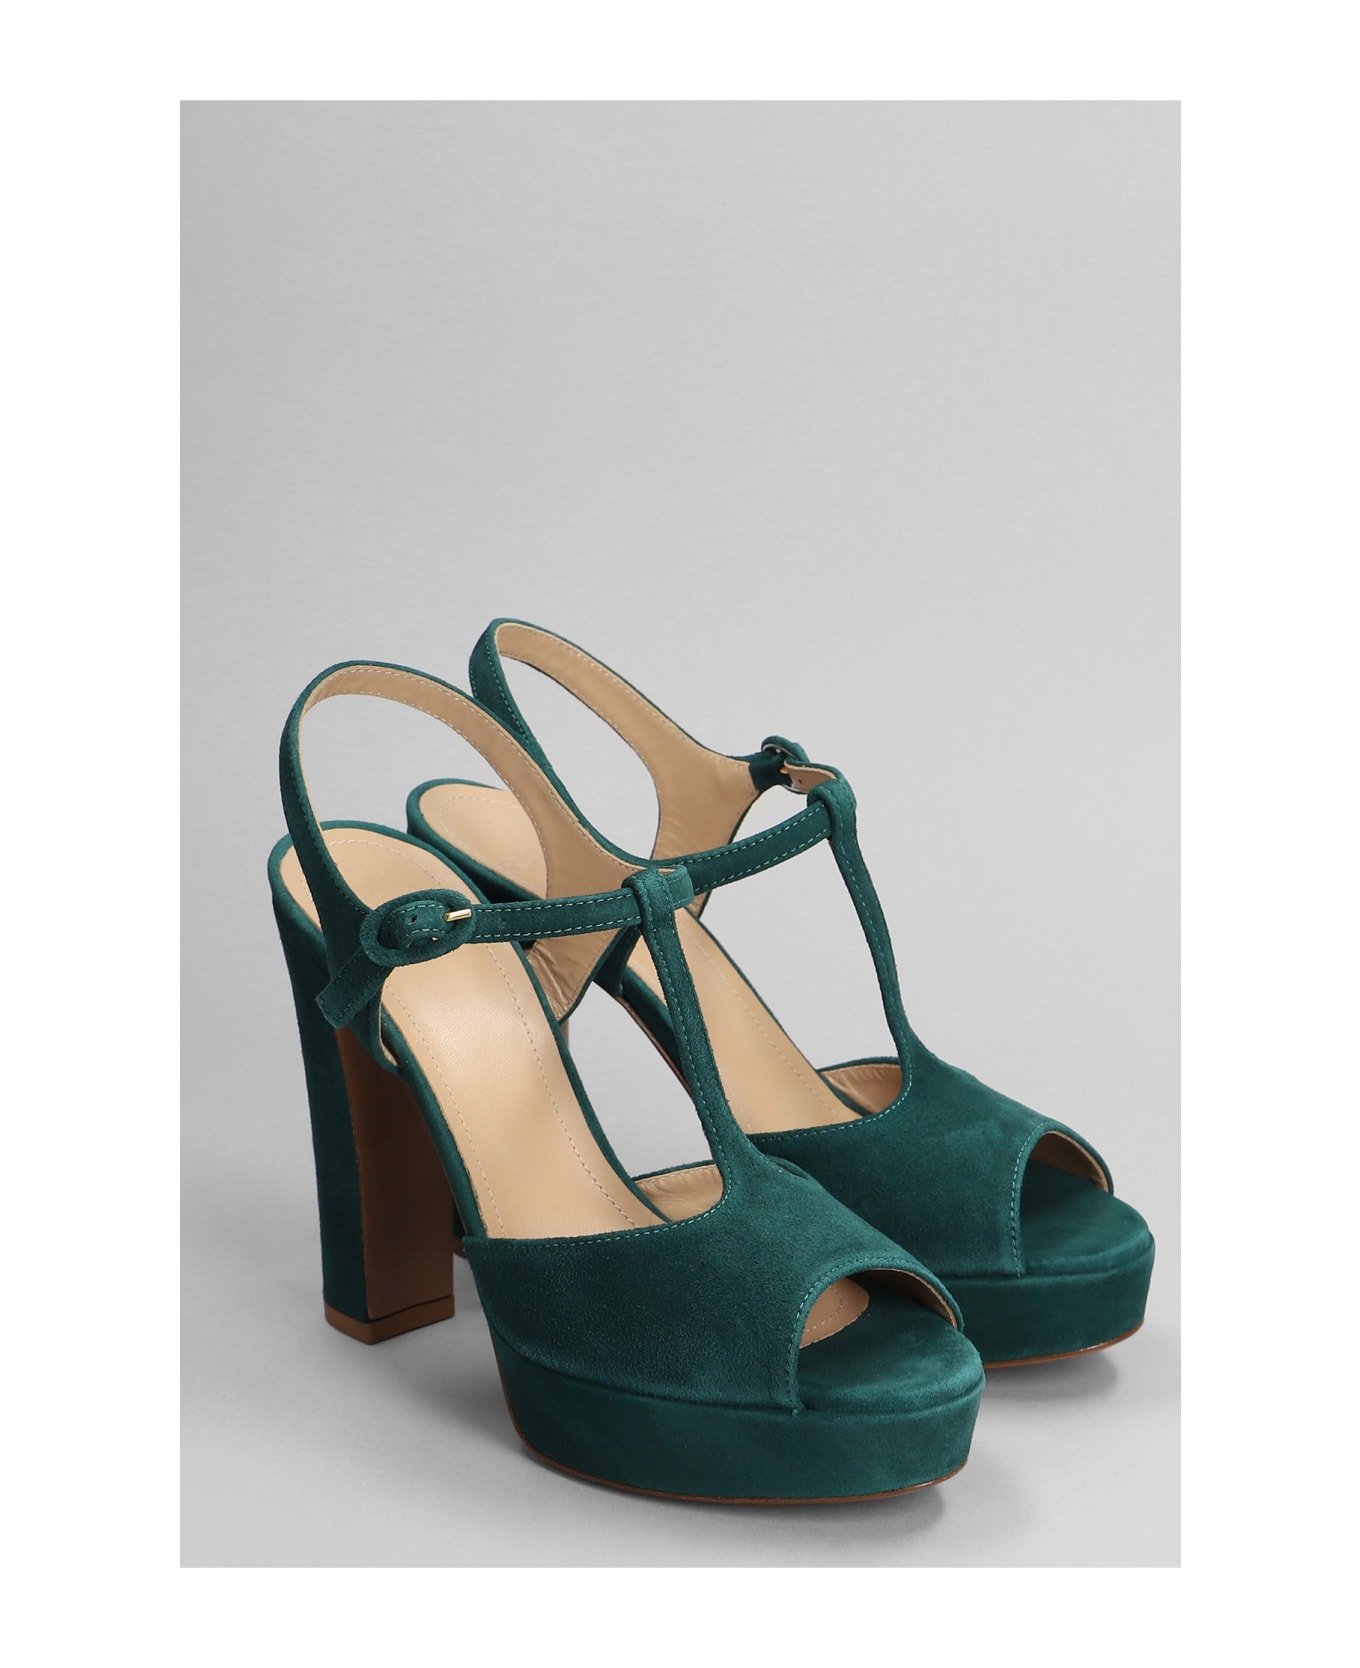 Relac Sandals In Green Suede - green